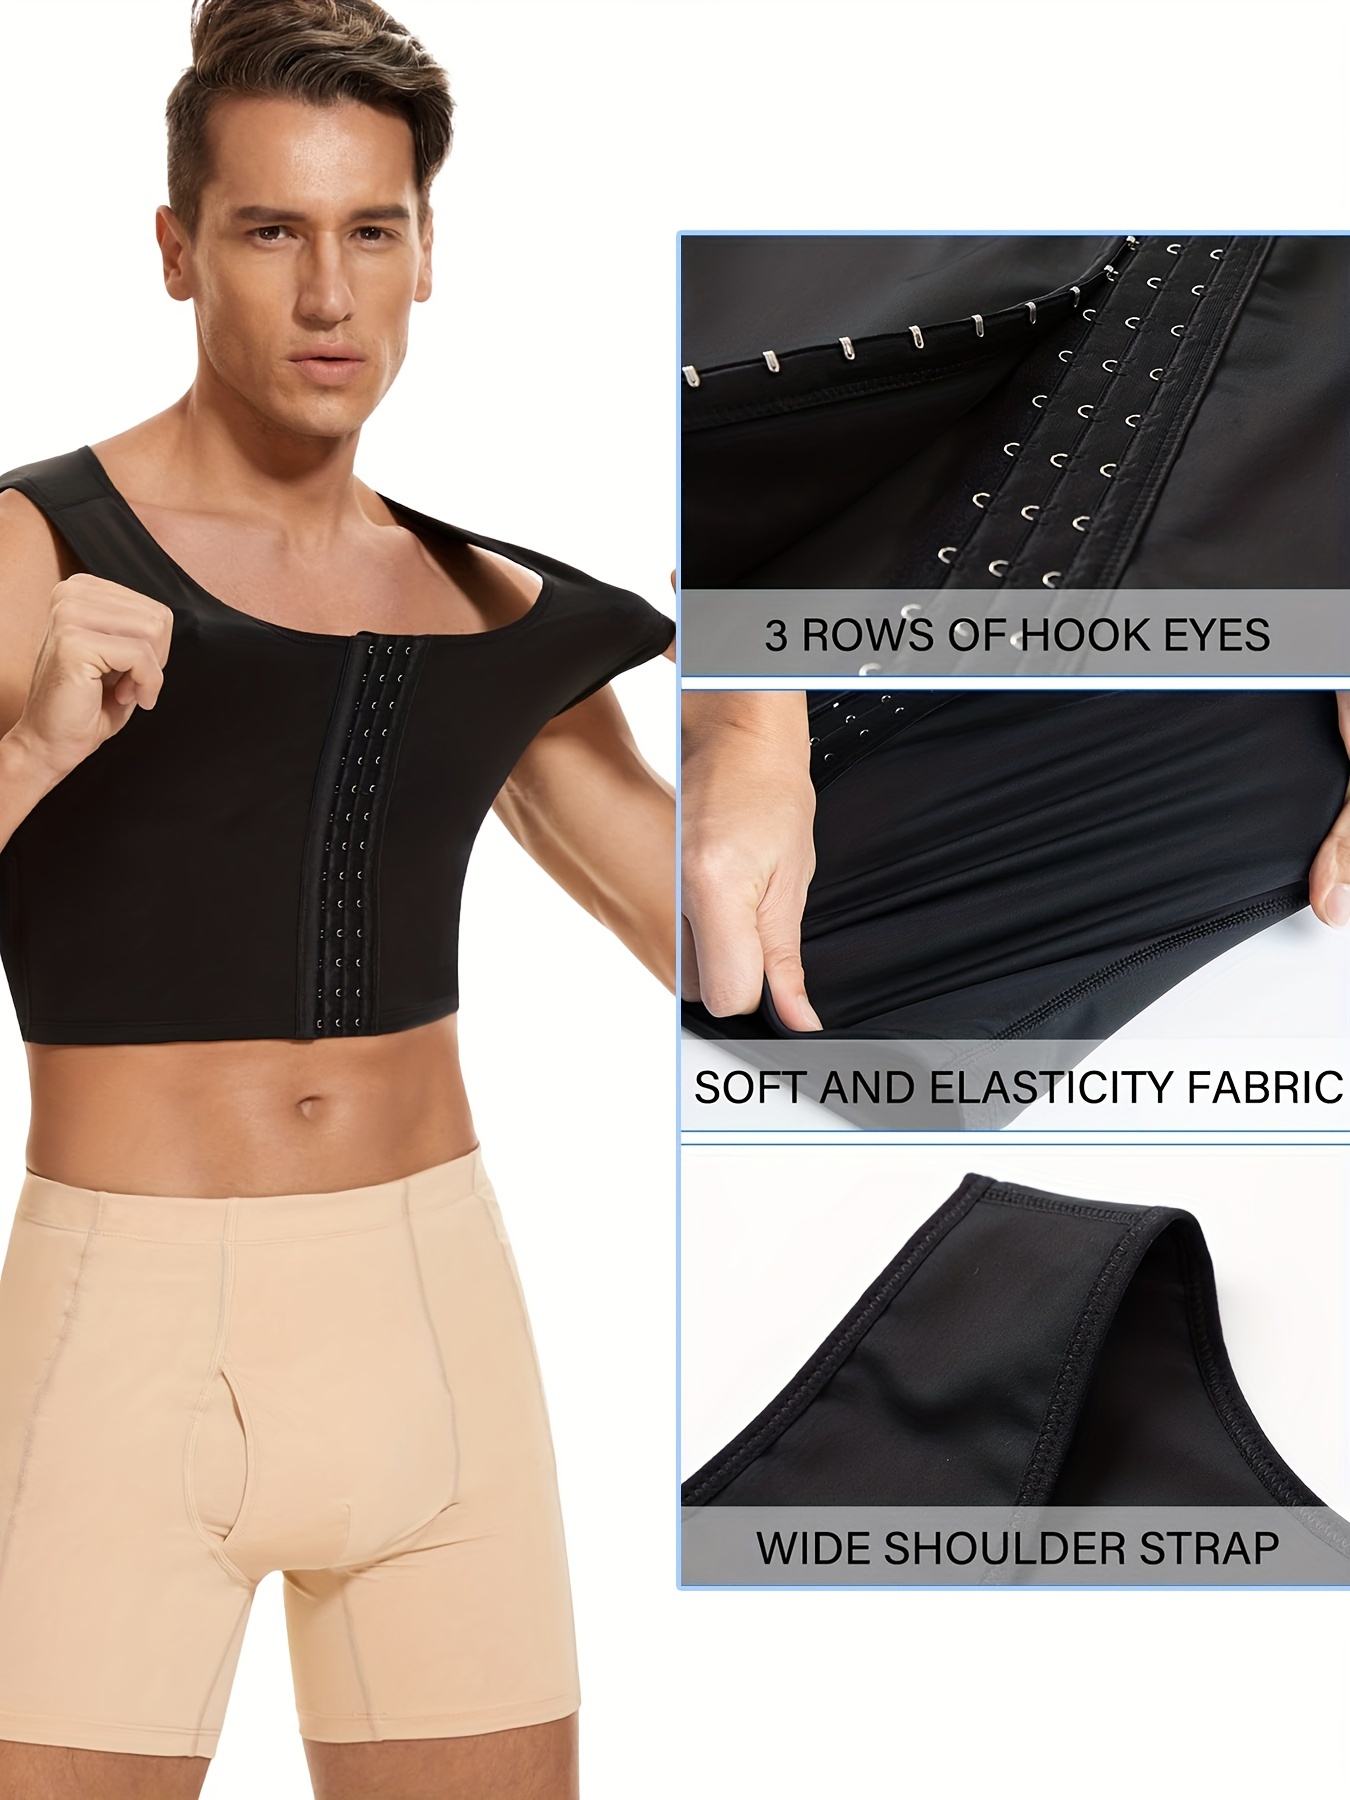 Mens Chest Binder Bra Body Shapewear Tank Top Stretchy Crop Top For  Fitness, Slimming And Comfortable Available In 6XL Plus Sizes From  Clothingdh, $48.54